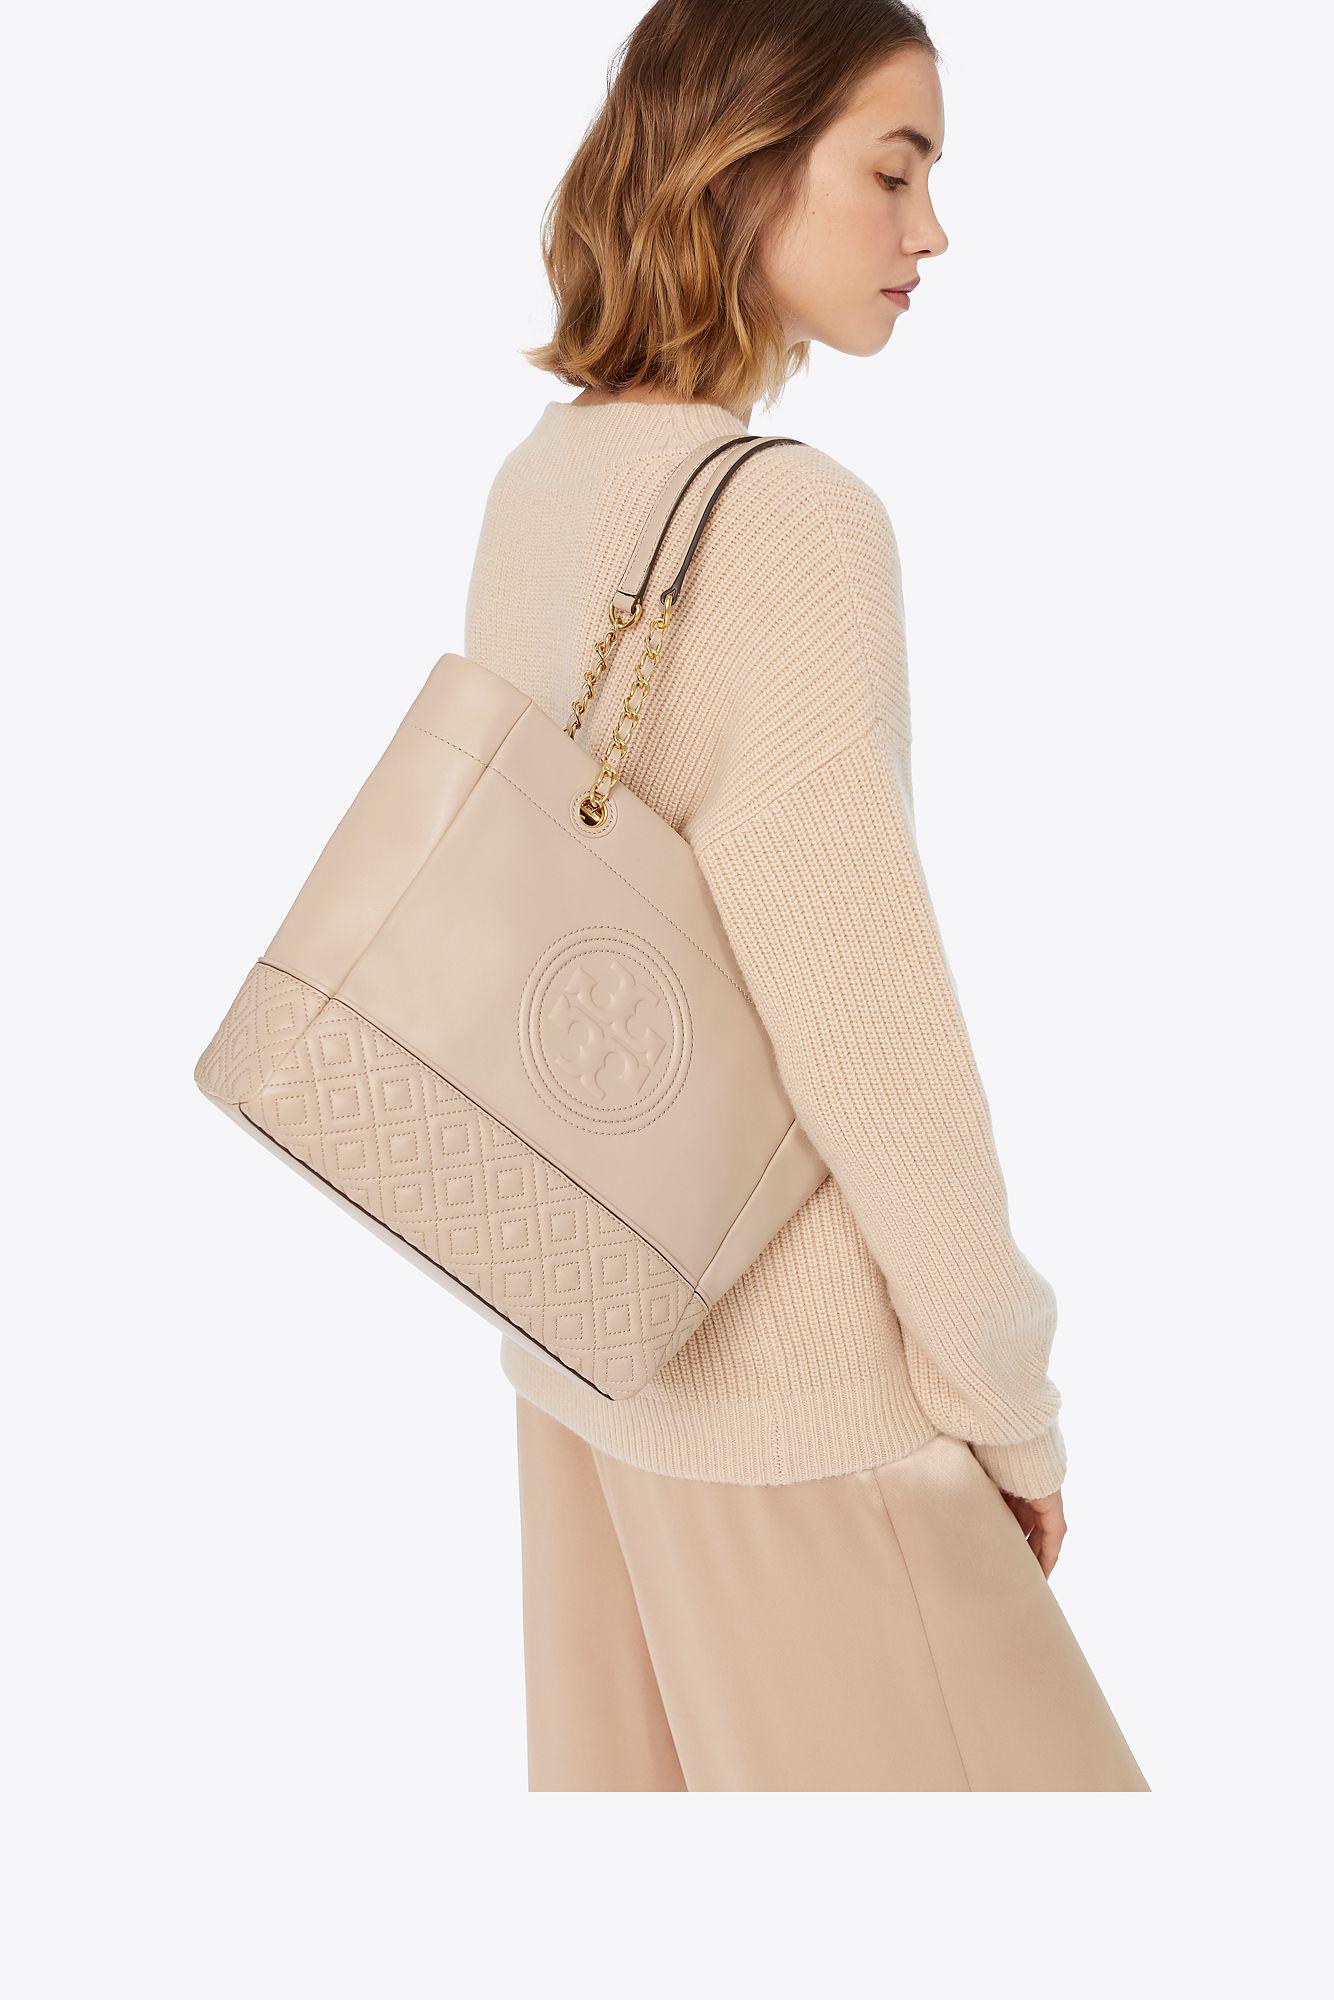 Tory Burch Fleming Tote in Natural | Lyst